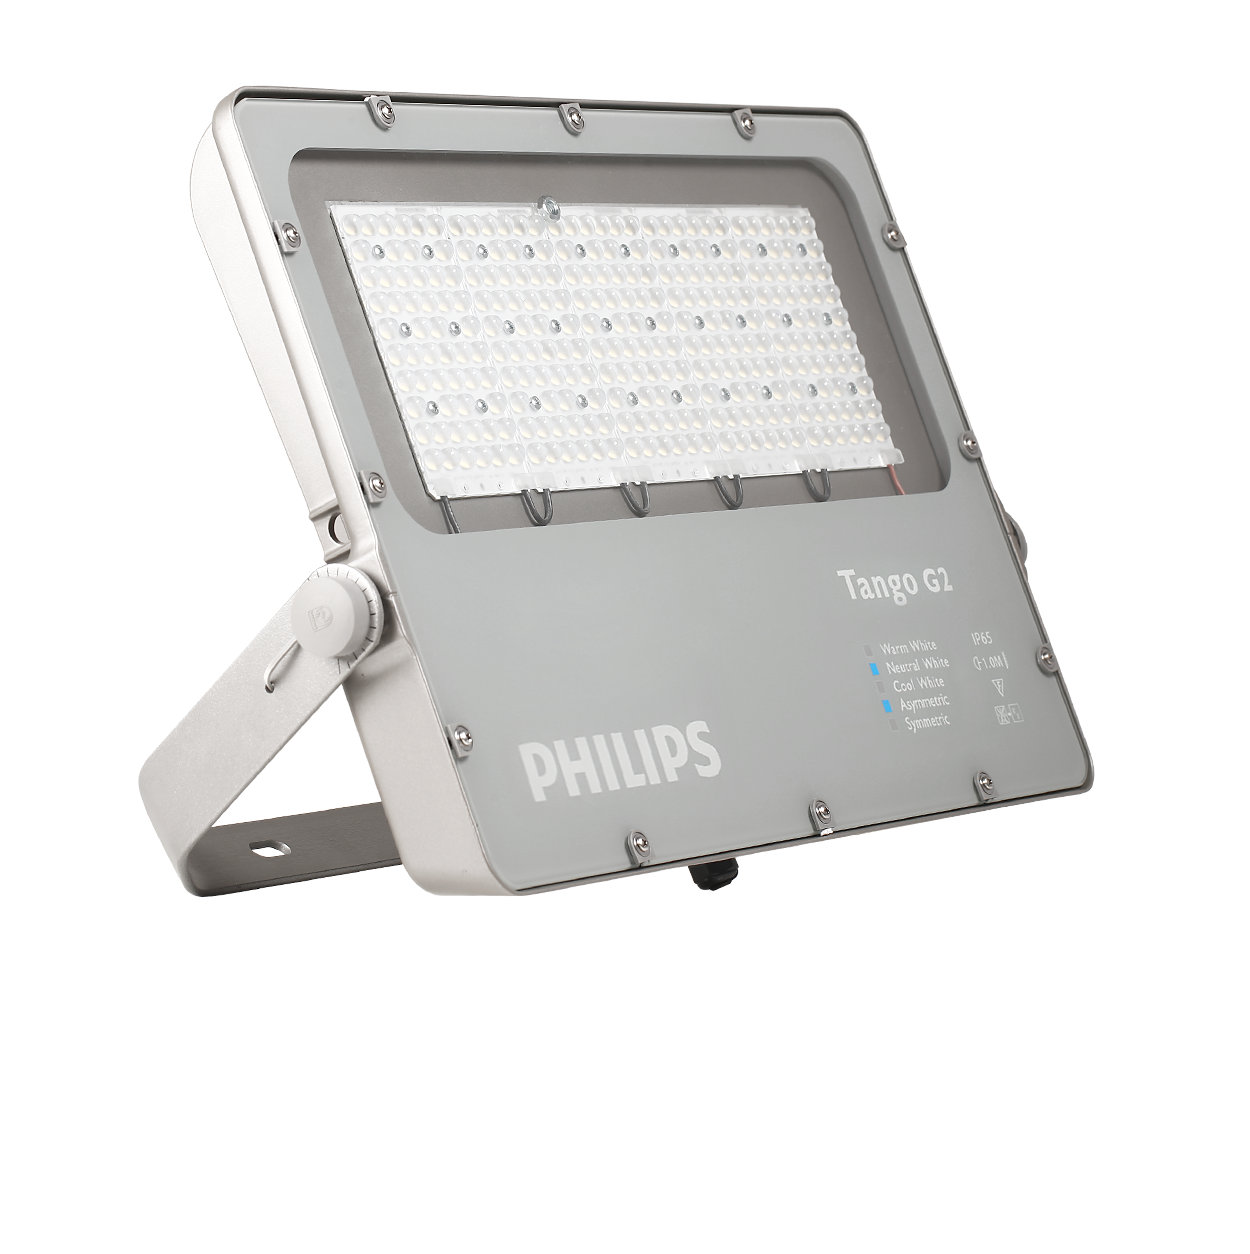 Complete range of configurable and connected solar flood lights upto 15,000 lumens.